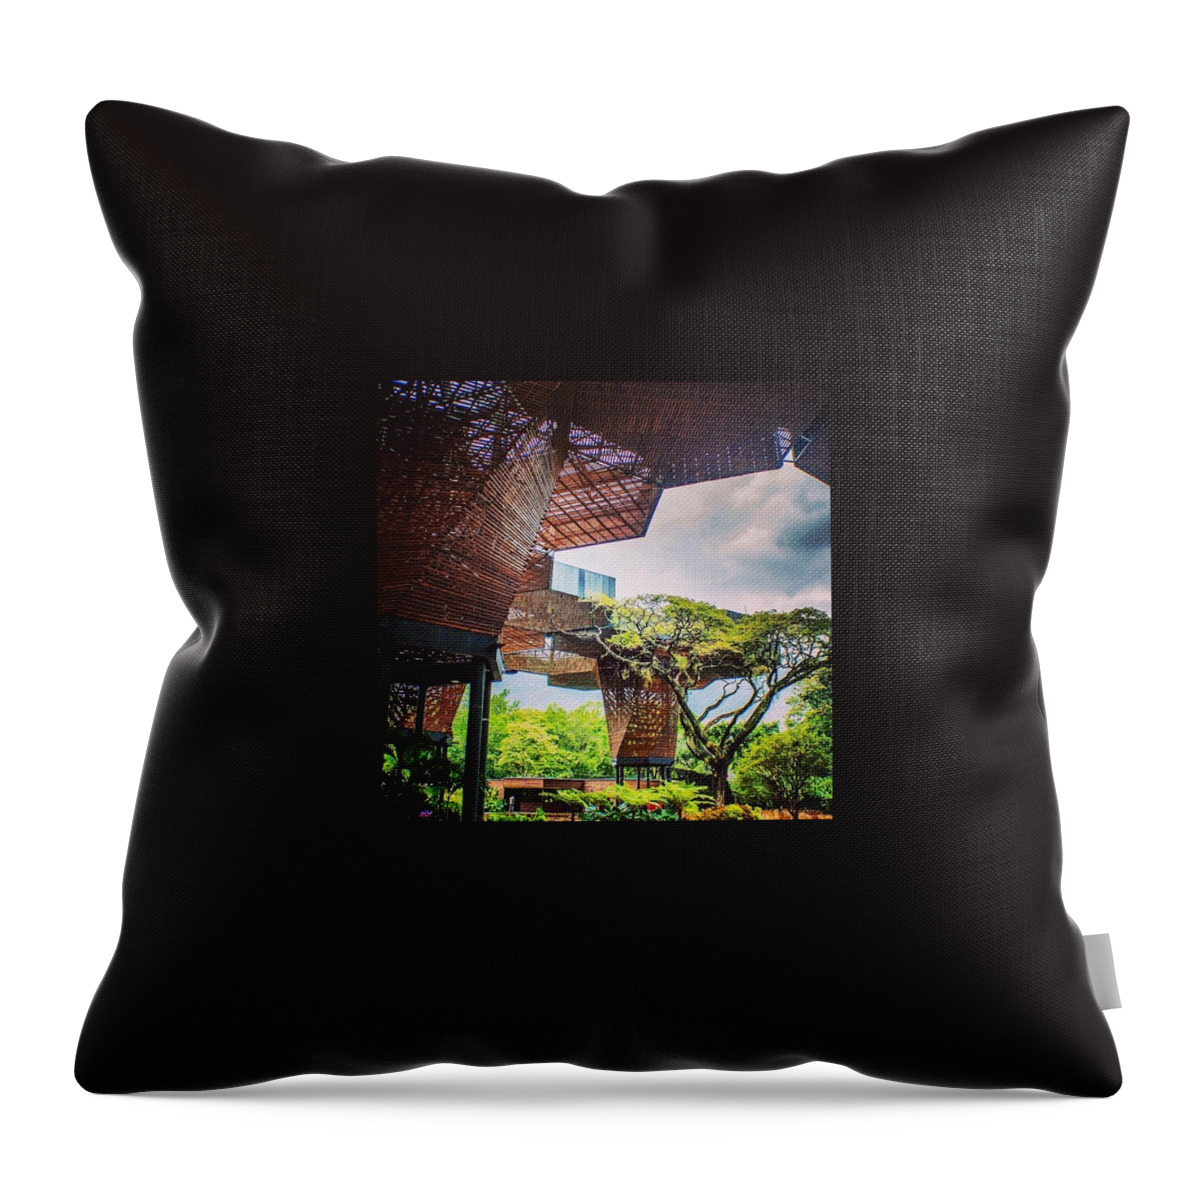 Beautiful Throw Pillow featuring the photograph Tree Houses, Medellin, Colombia by Aleck Cartwright